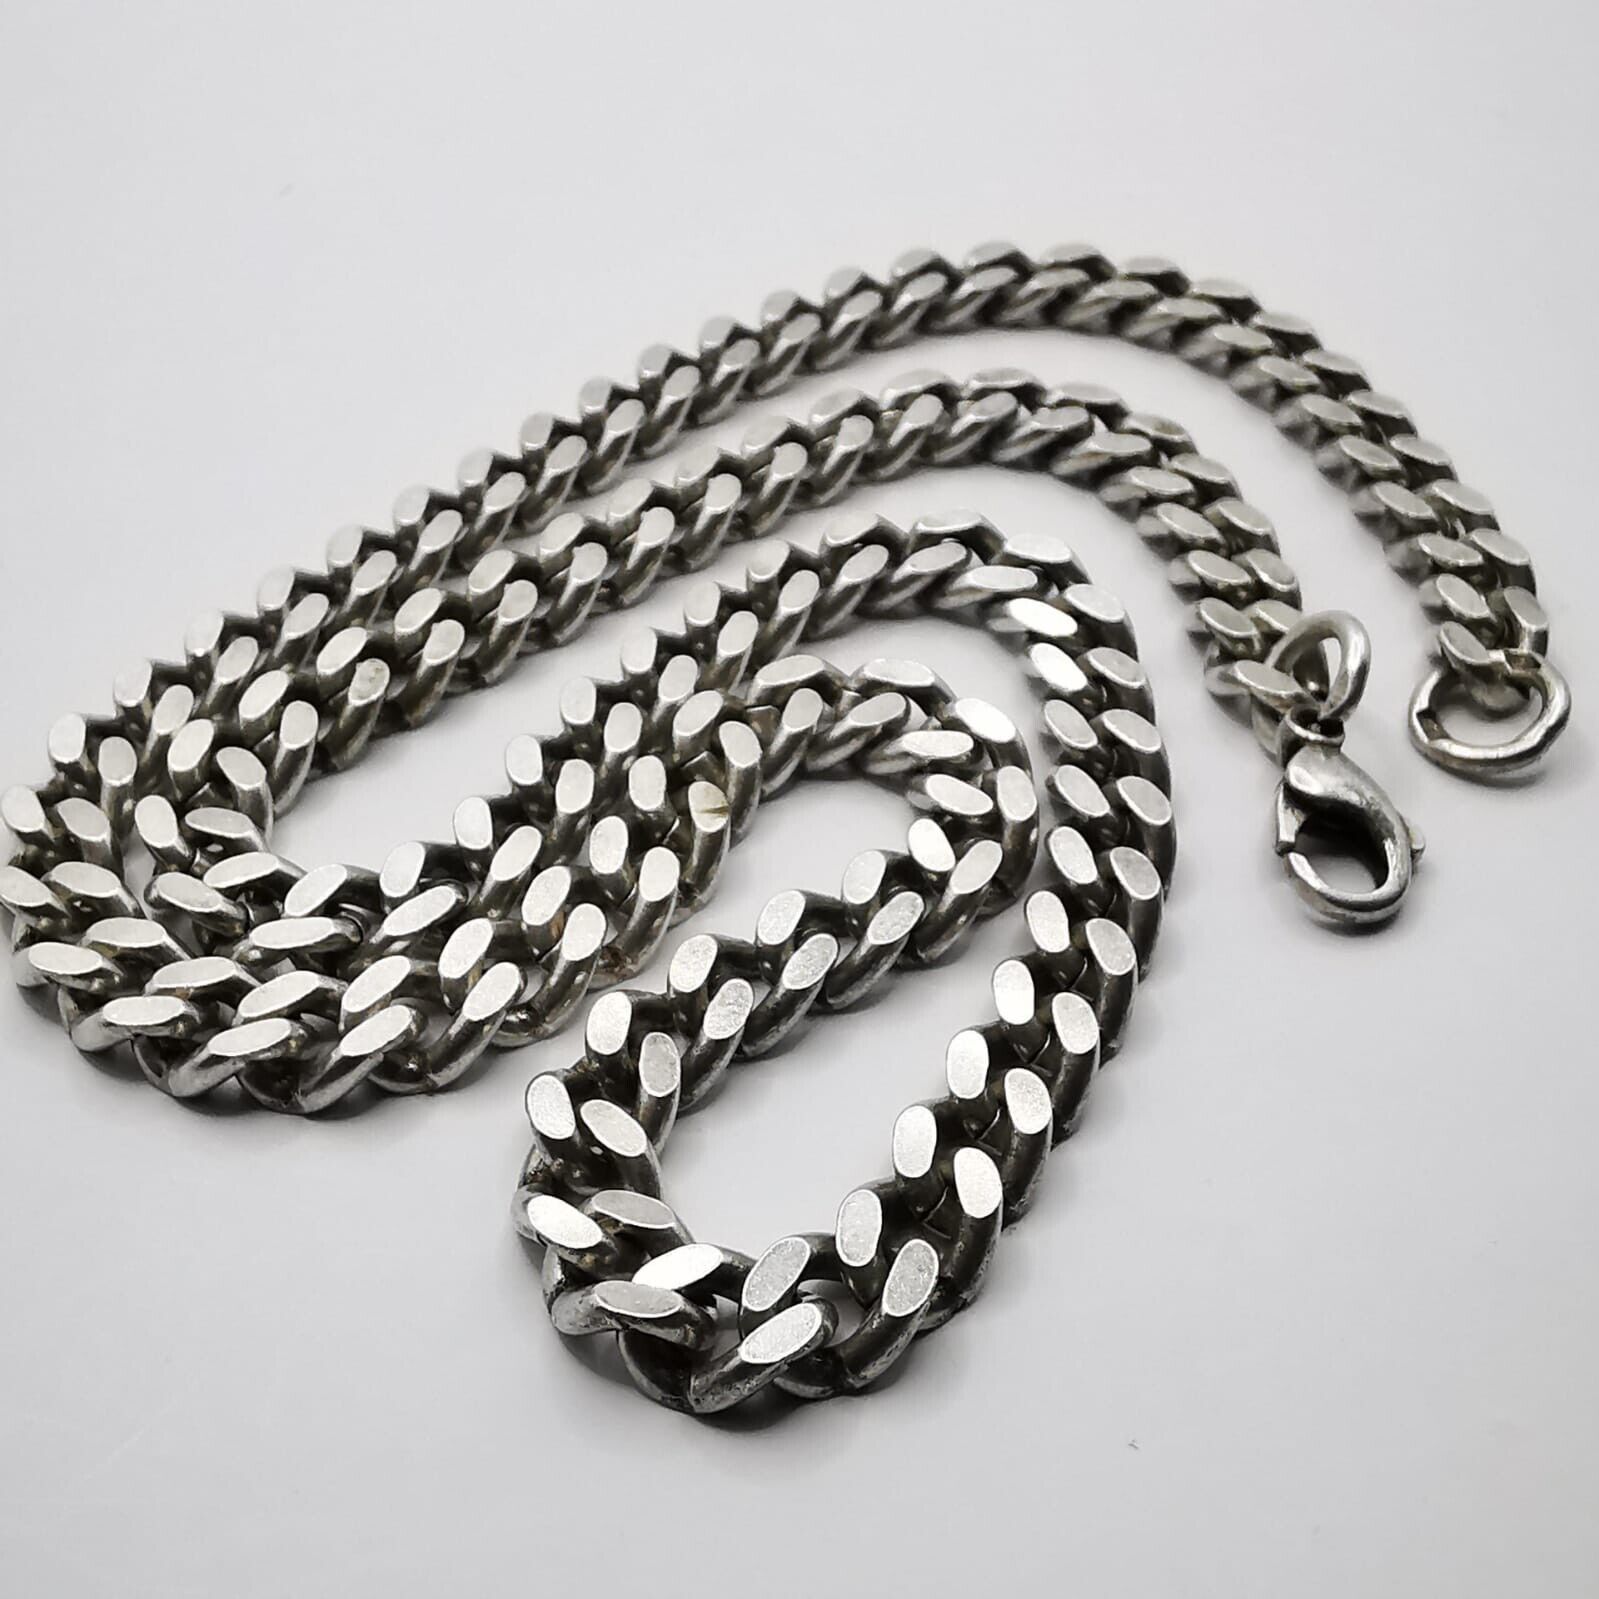 Vintage Massive Chain Jewelry ,925 Sterling Silver,Signature 53,72g